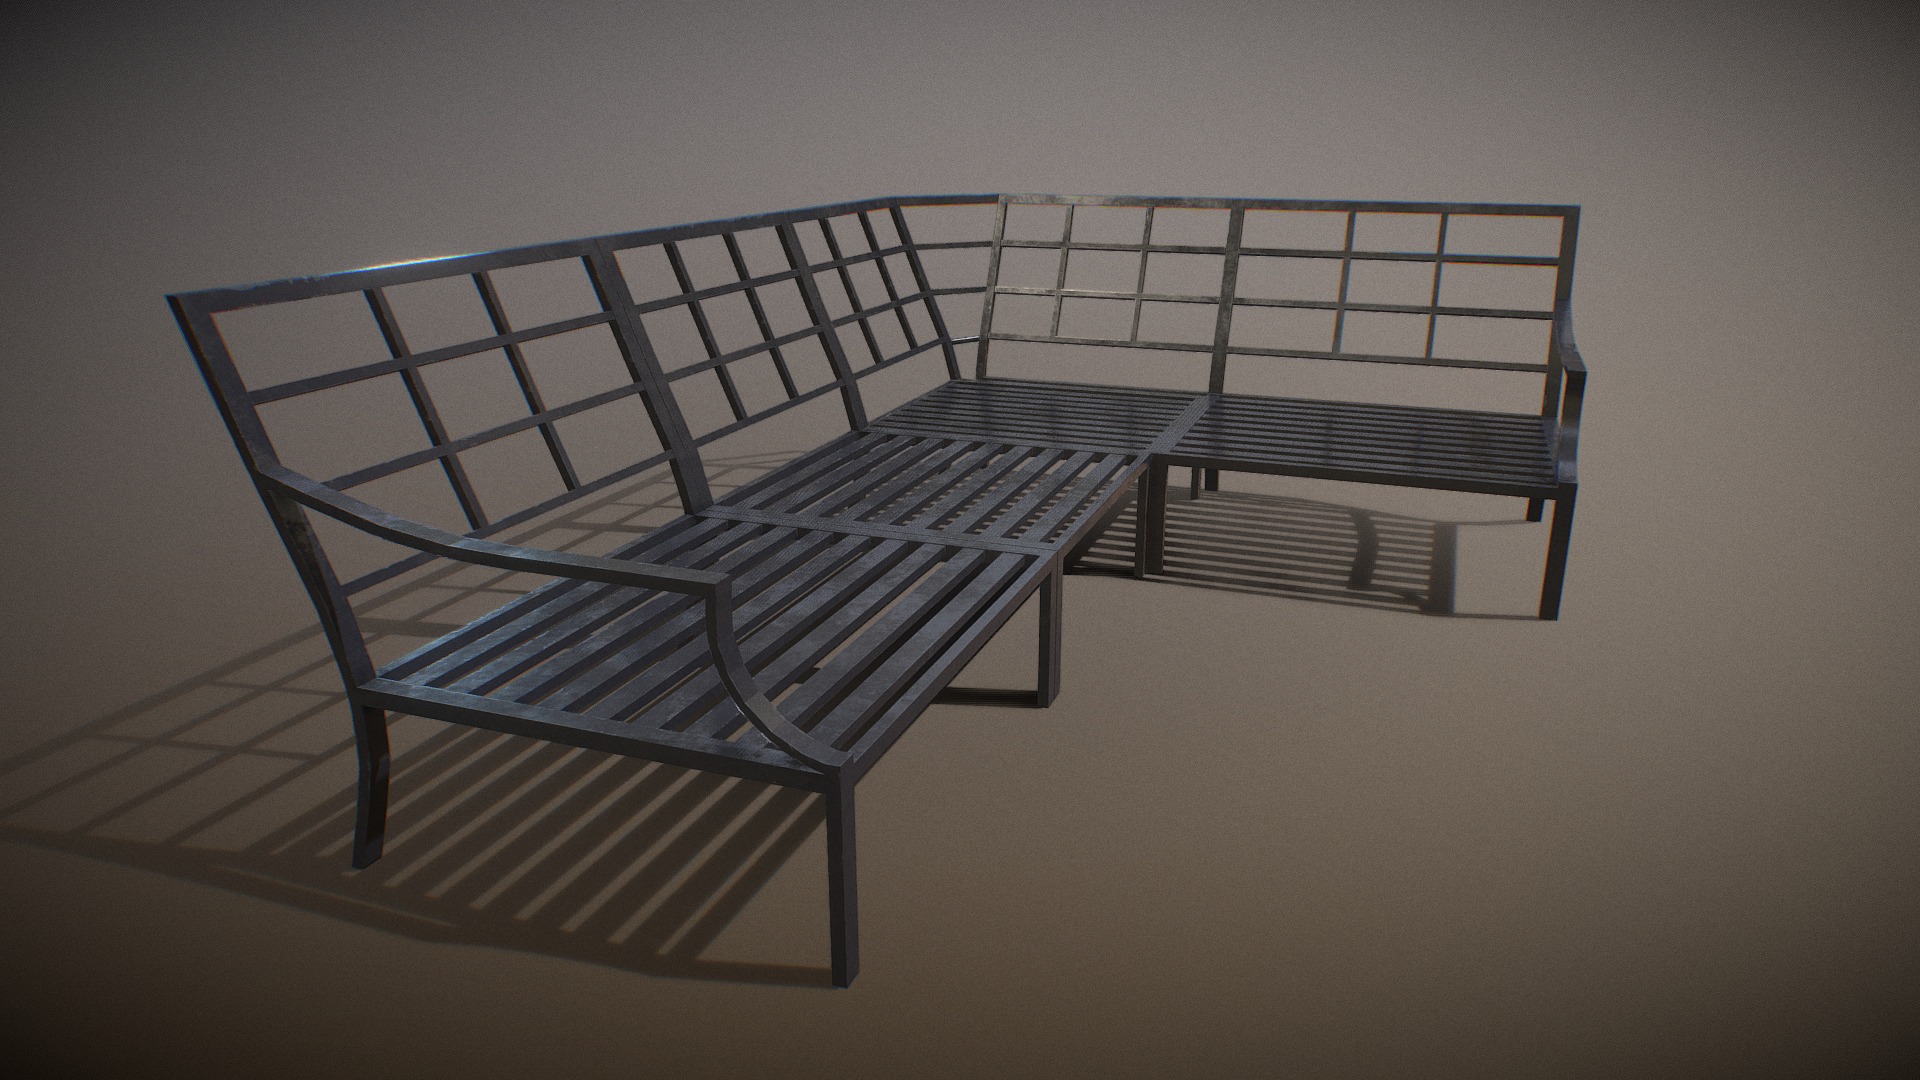 3D model BenchSteelPainted - This is a 3D model of the BenchSteelPainted. The 3D model is about a metal structure with a metal frame.